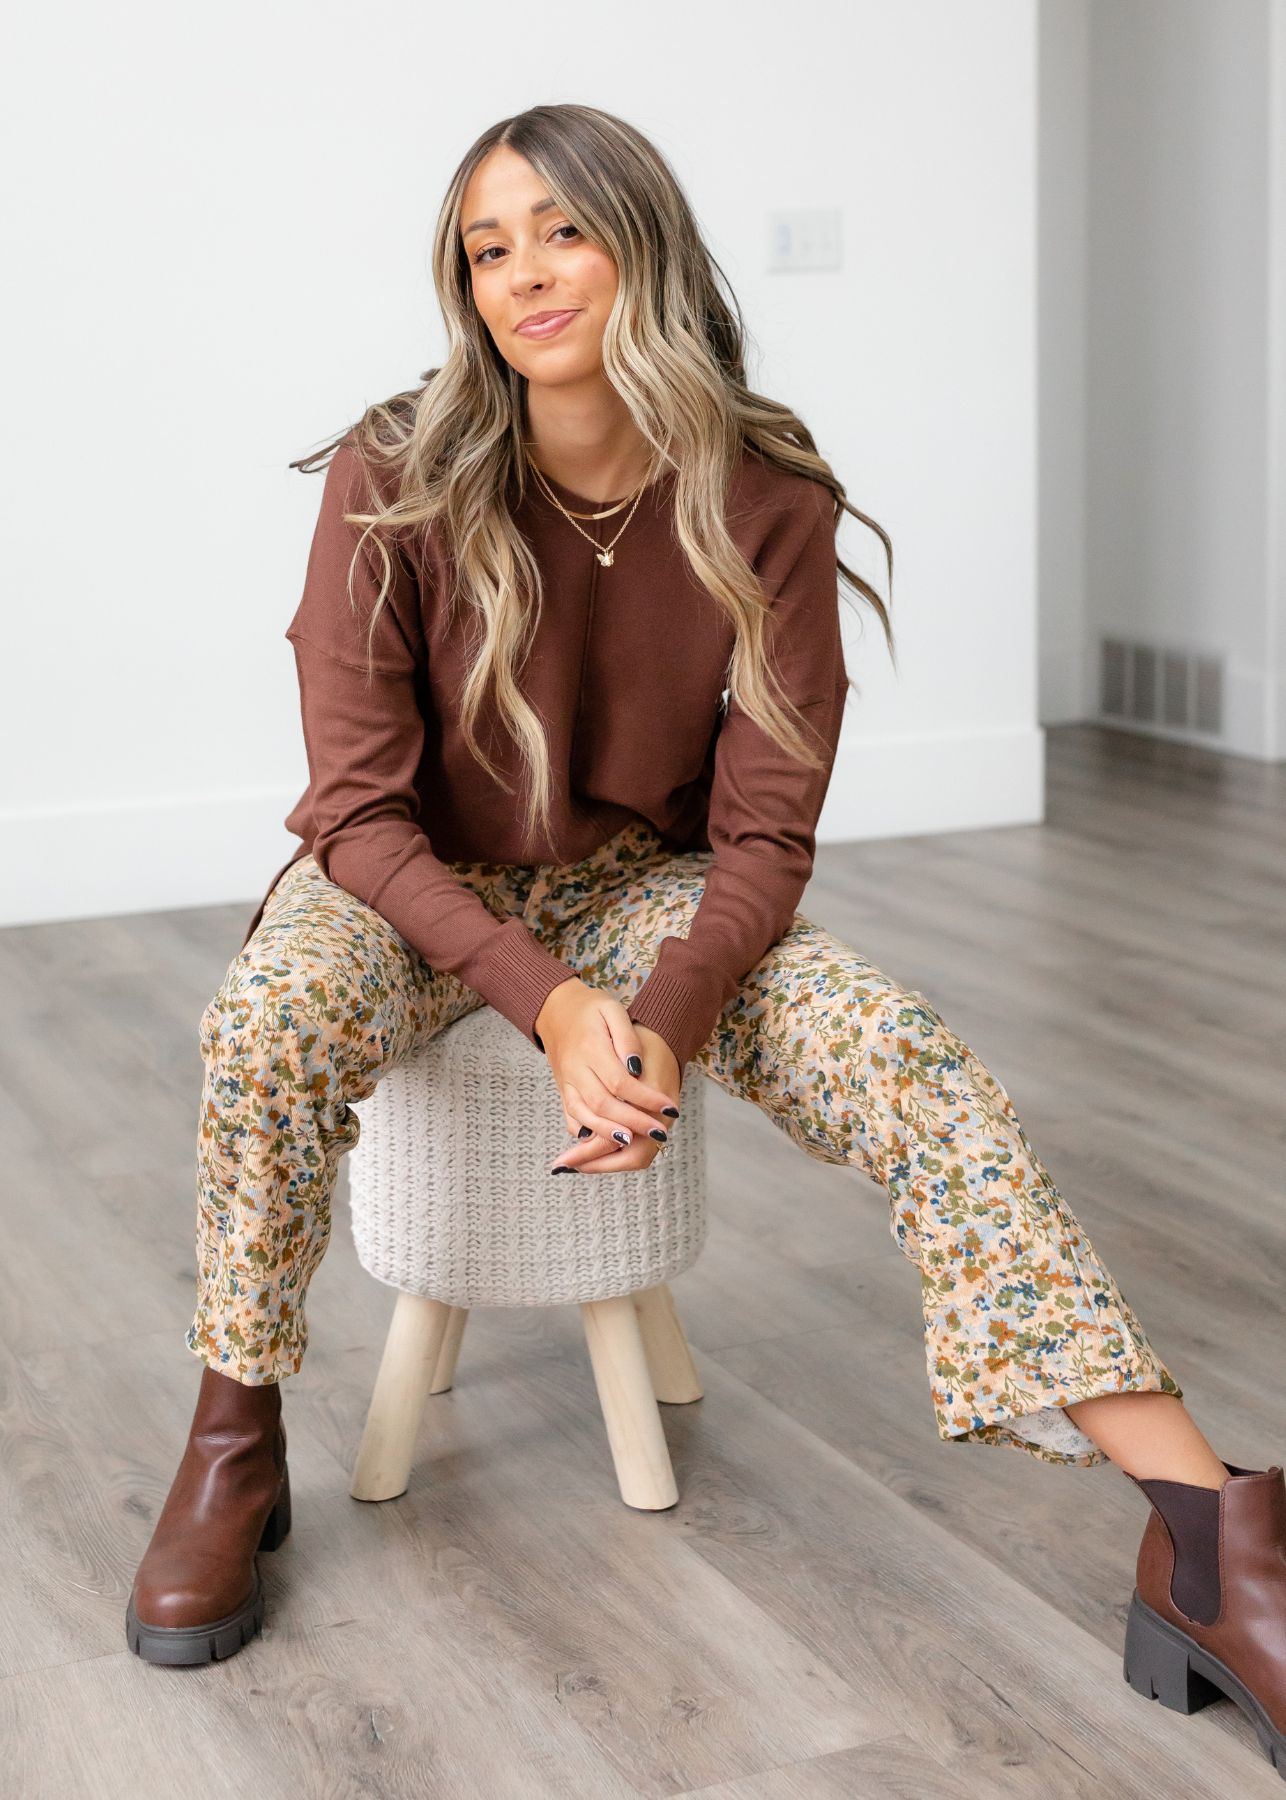 Marie Taupe Floral Pants